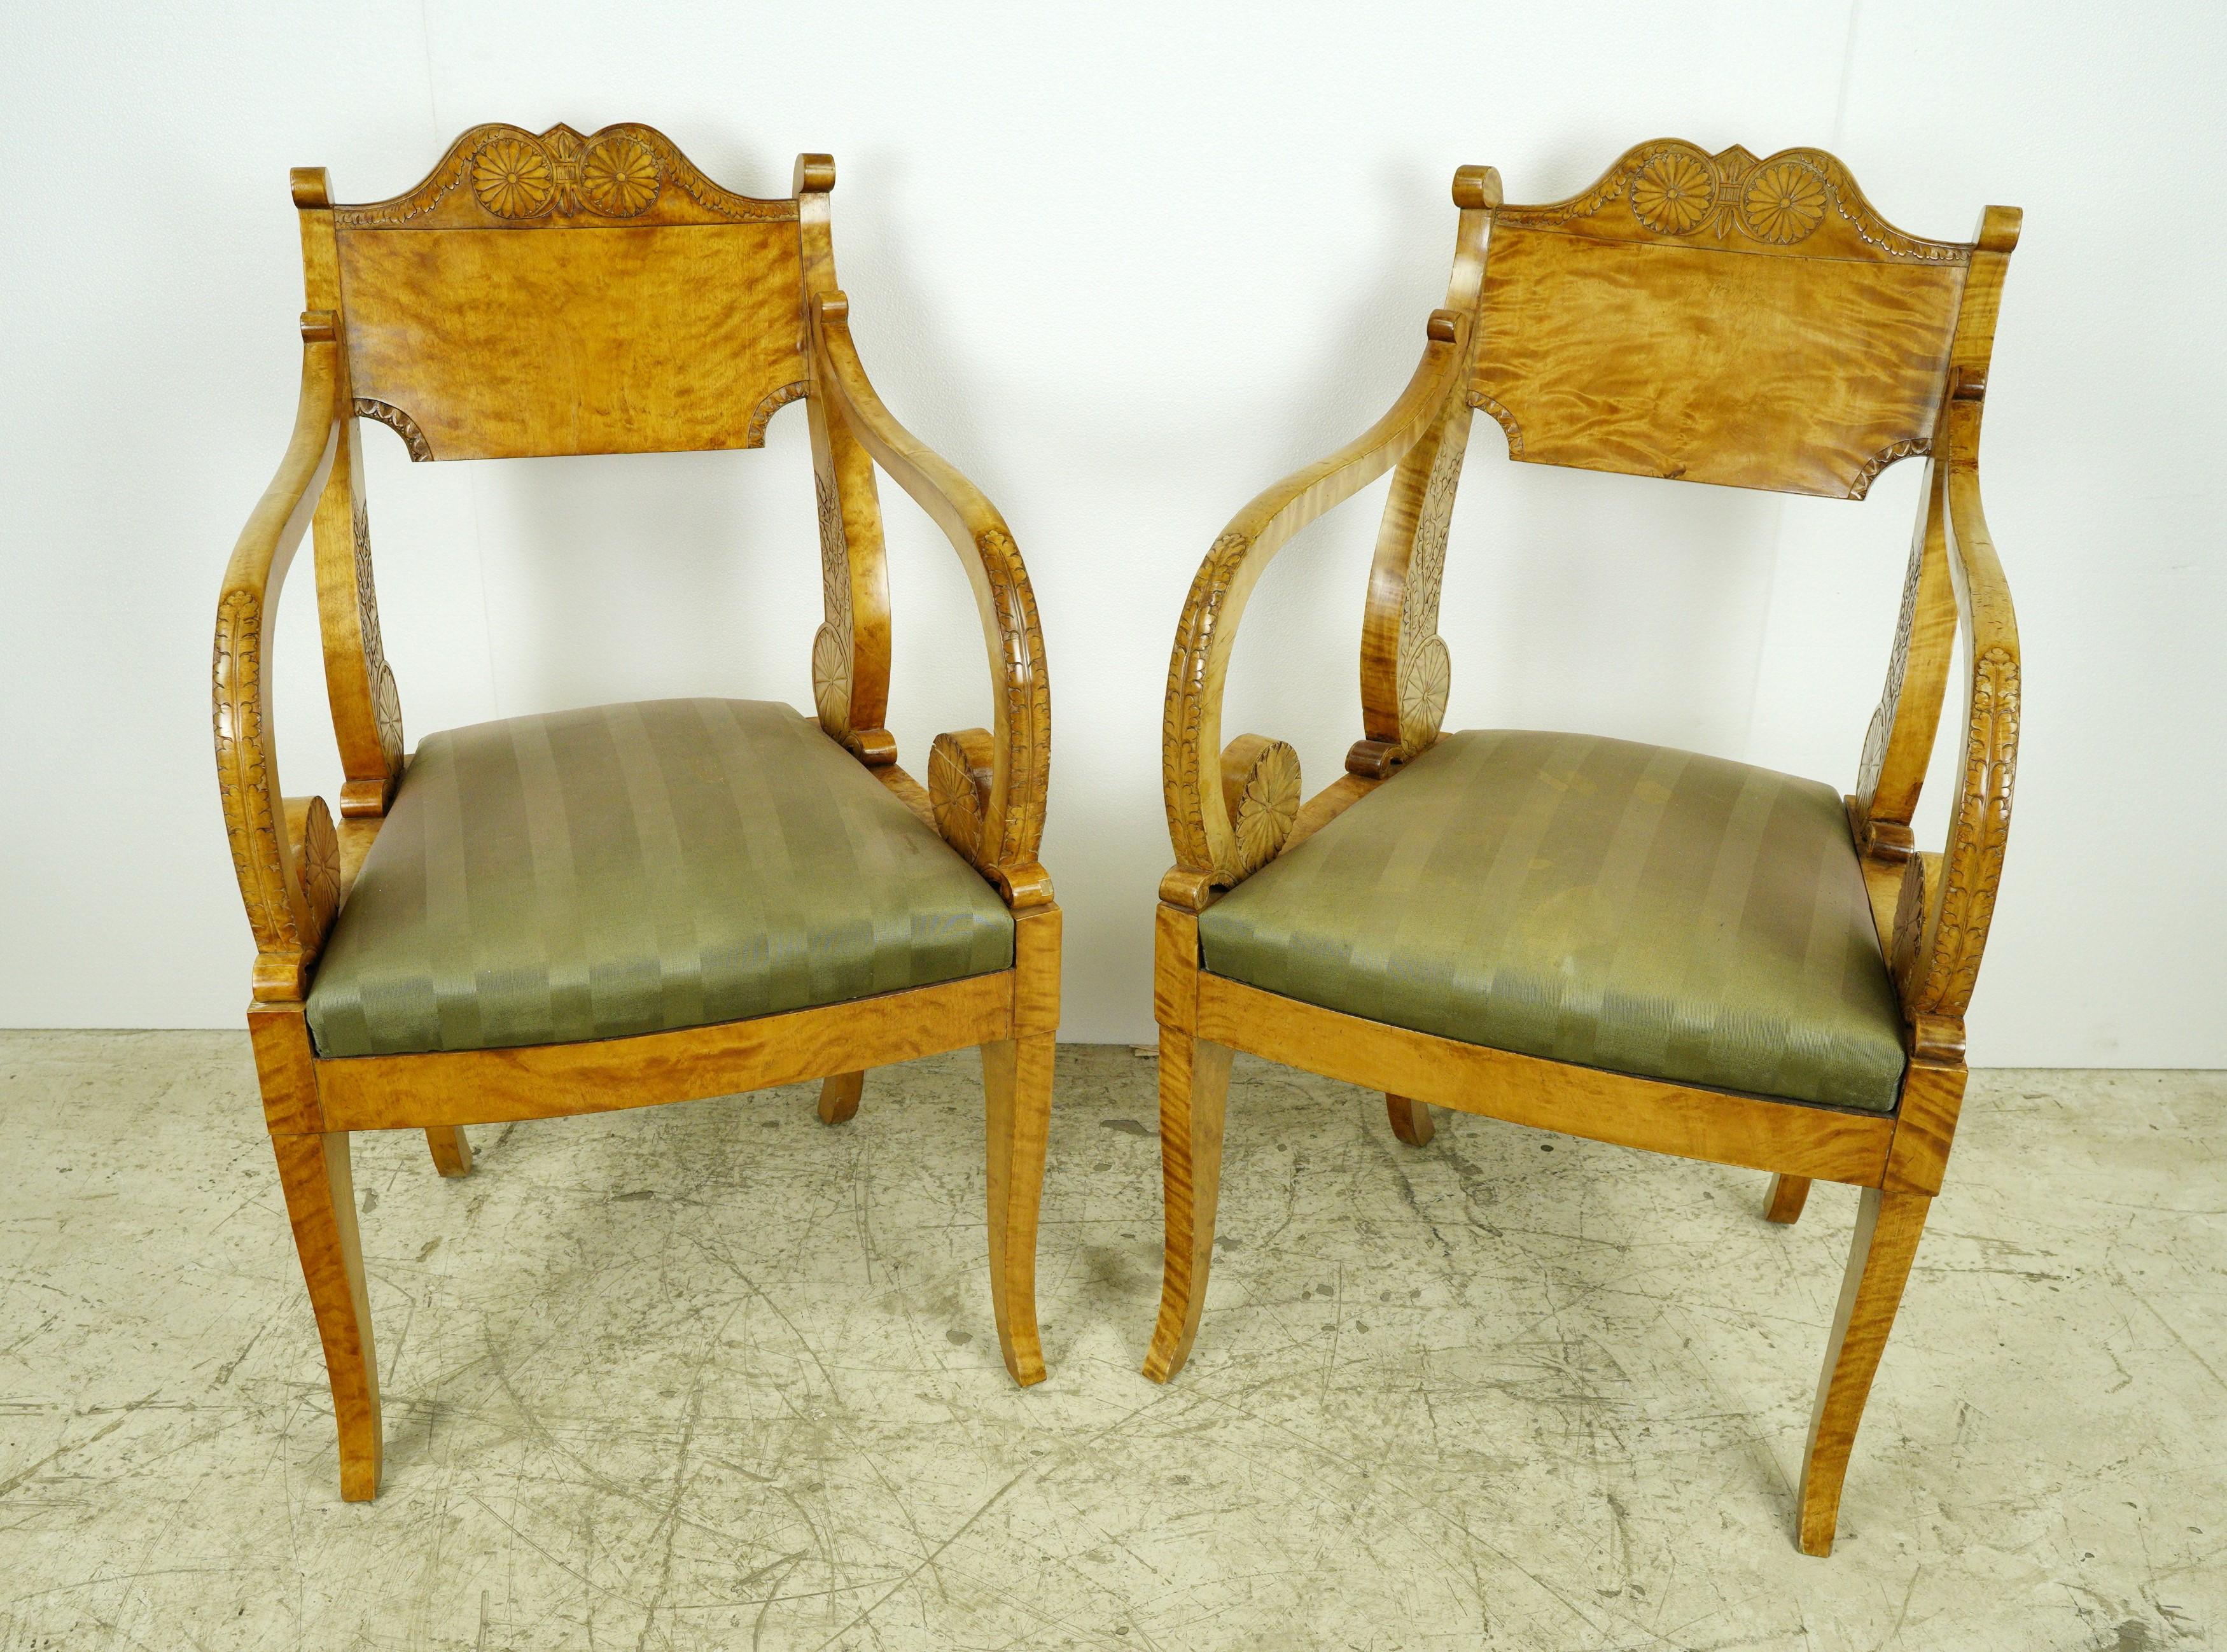 From an estate in Greenwich, Connecticut, this set reflects the sophistication and quality associated with the Biedermeier period. The two chairs feature a solid and well-built construction, showcasing carved floral and 